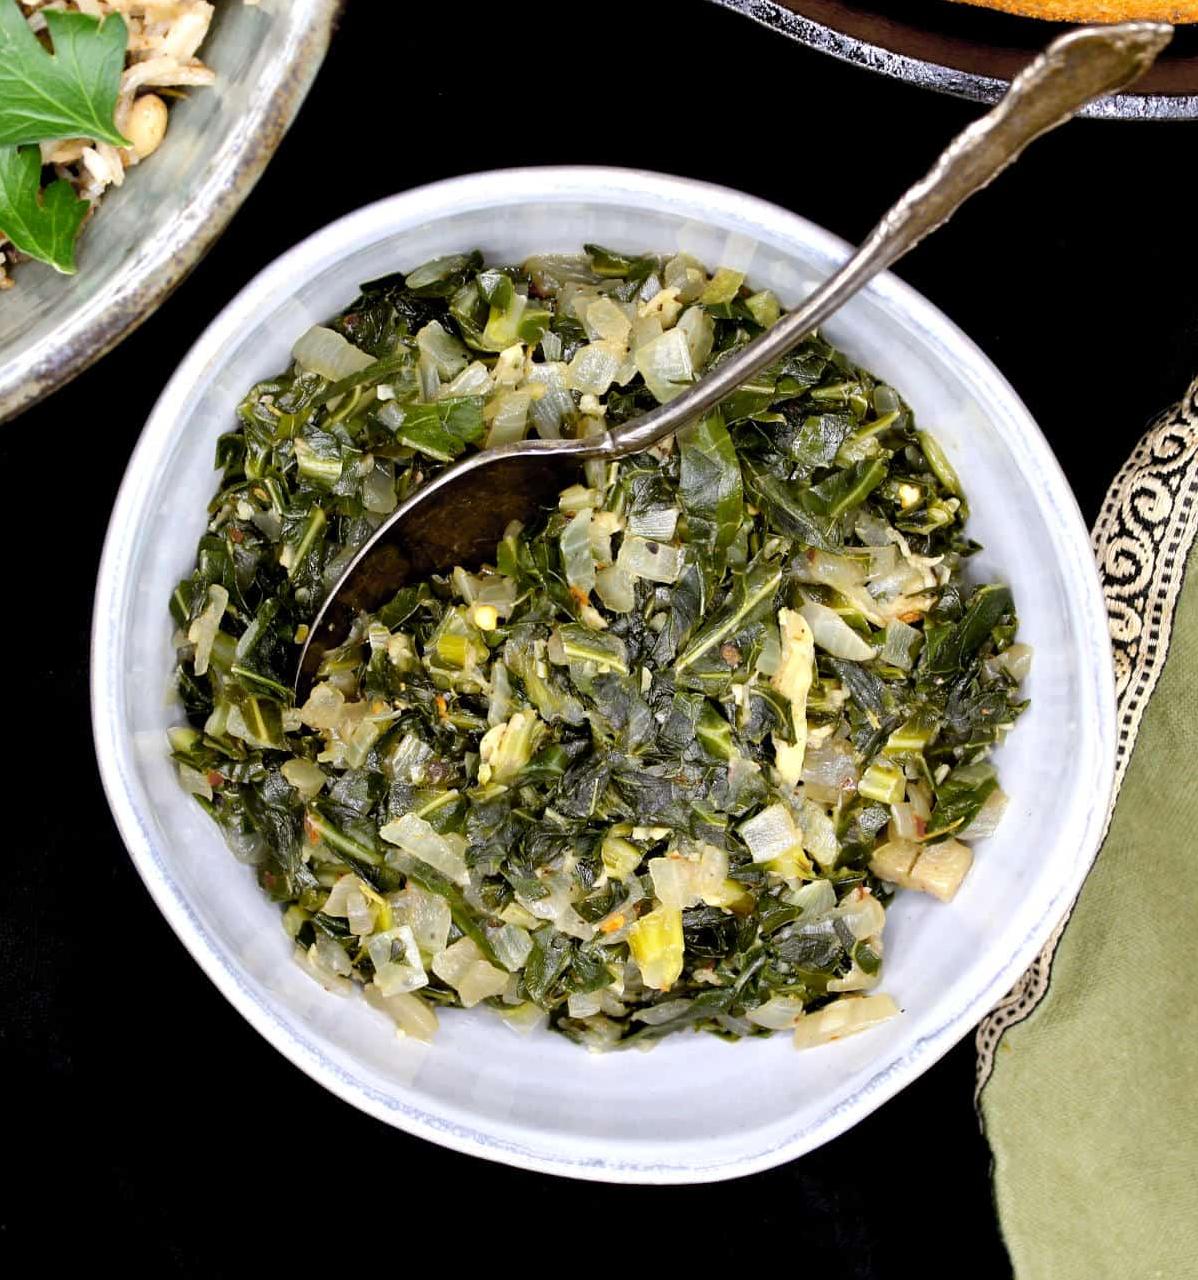  Get your greens on with this delicious recipe